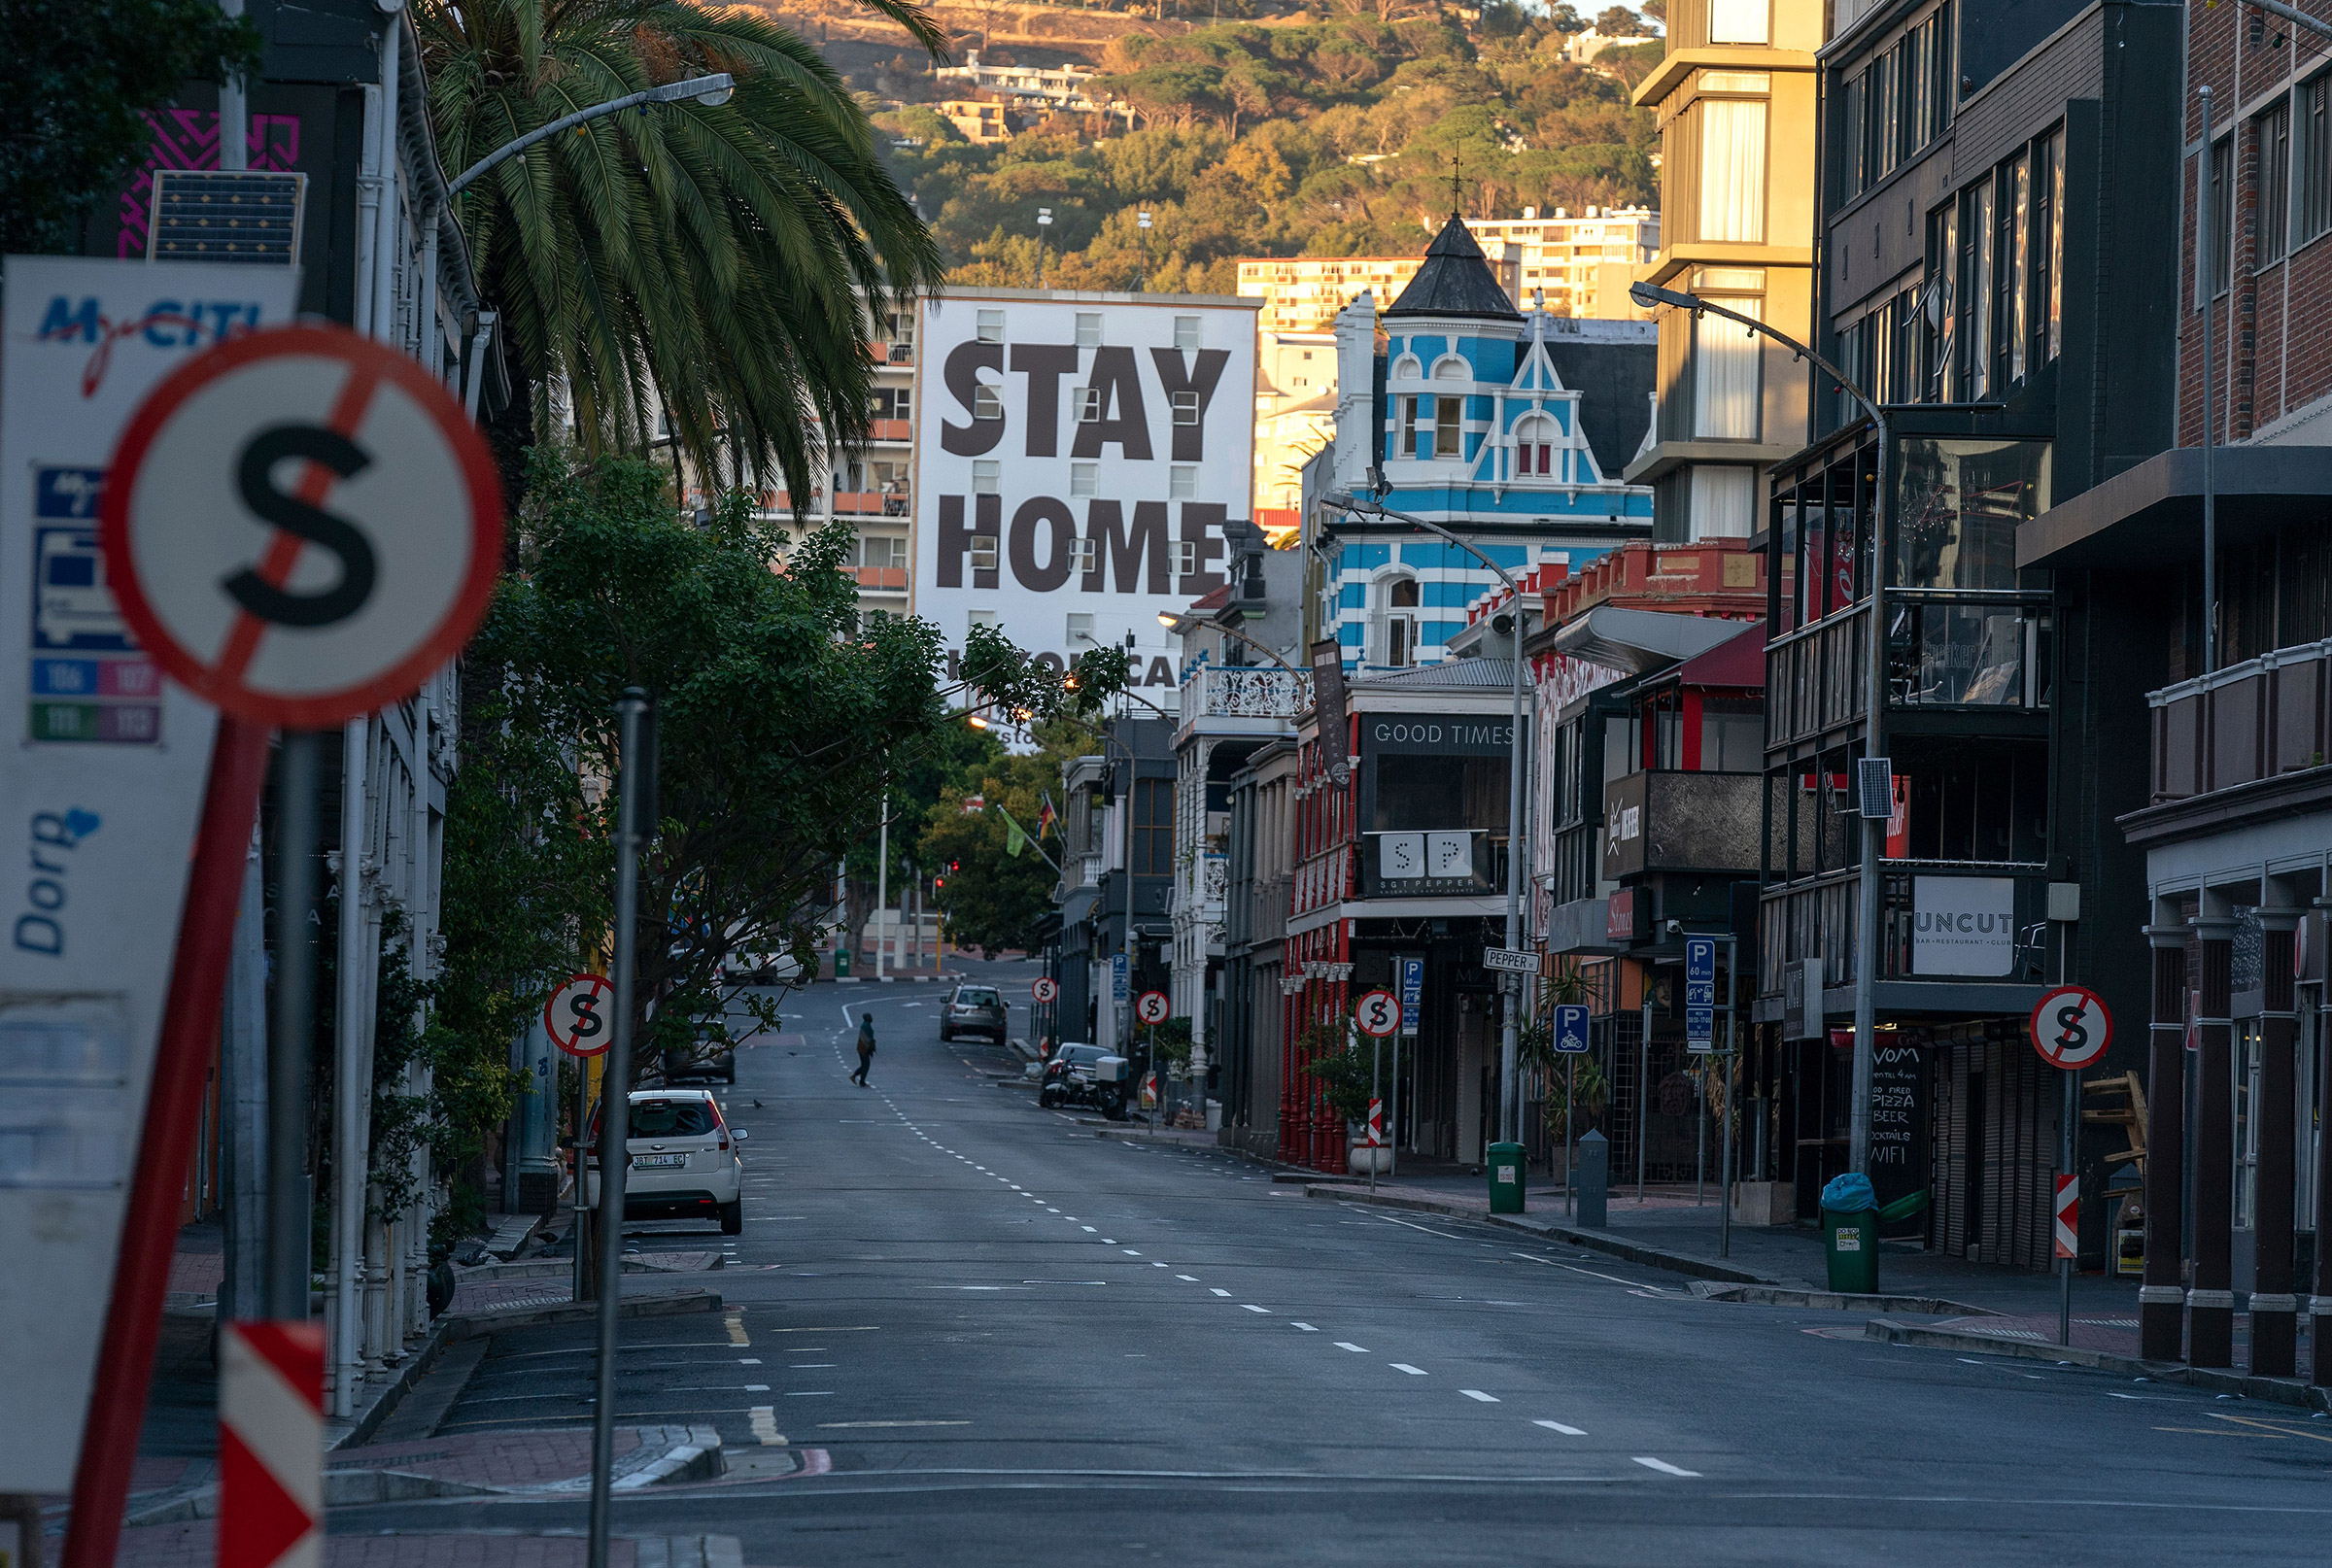 A man crosses a deserted street during day one of a 21-day national total lockdown in Cape Town on March 27, 2020. (Nic Bothma—EPA-EFE/Shutterstock)